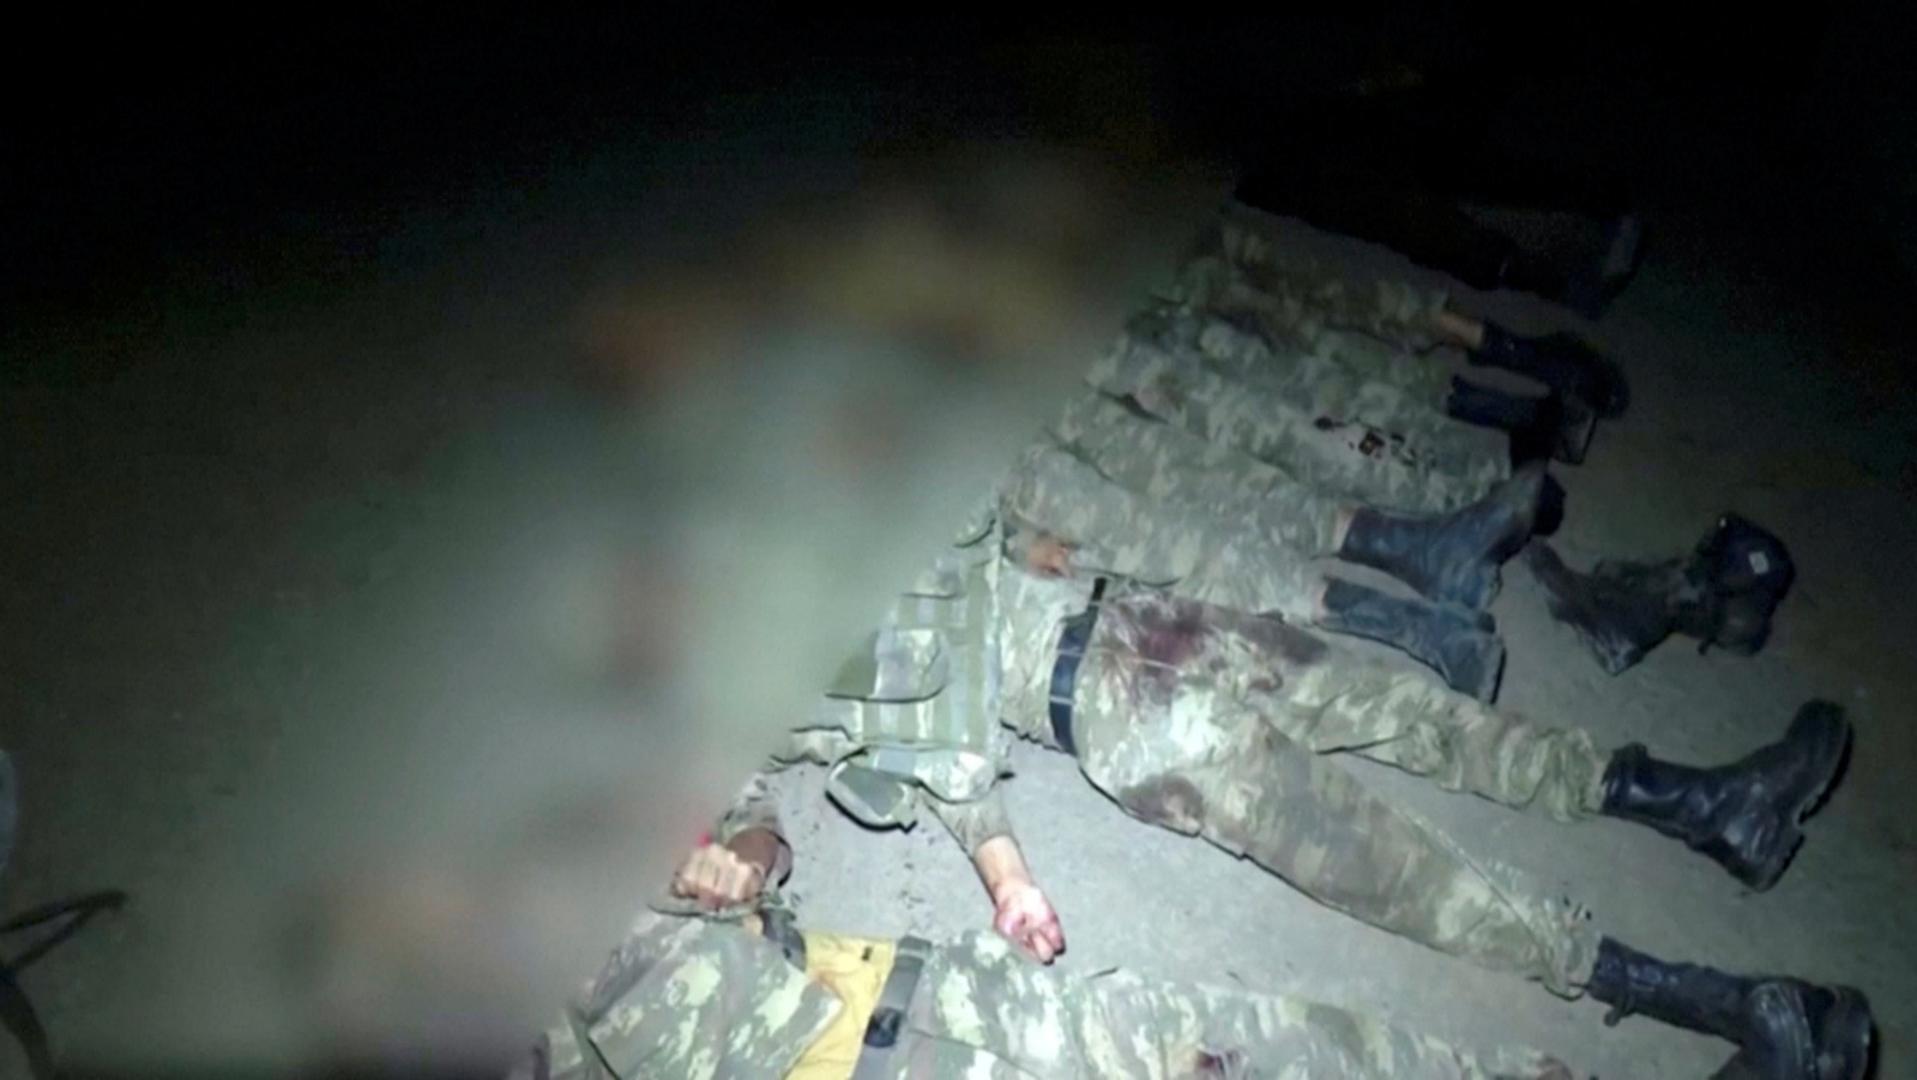 A still image from a handout video shows bodies of men in military uniform, who are said to be Azeri military personnel, in an unidentified location SENSITIVE MATERIAL. THIS IMAGE MAY OFFEND OR DISTURB    A still image from a video released by the army of the self-proclaimed Nagorno-Karabakh breakaway region shows bodies of men in military uniform, who are said to be Azeri military personnel, in an unidentified location, in this still image from footage released September 28, 2020. Picture blurred at source. Self-Proclaimed Artsakh Defence Army Handout/Reuters TV via REUTERS  ATTENTION EDITORS - THIS IMAGE HAS BEEN SUPPLIED BY A THIRD PARTY. NO RESALES. NO ARCHIVES. MANDATORY CREDIT. SELF-PROCLAIMED ARTSAKH DEFENCE